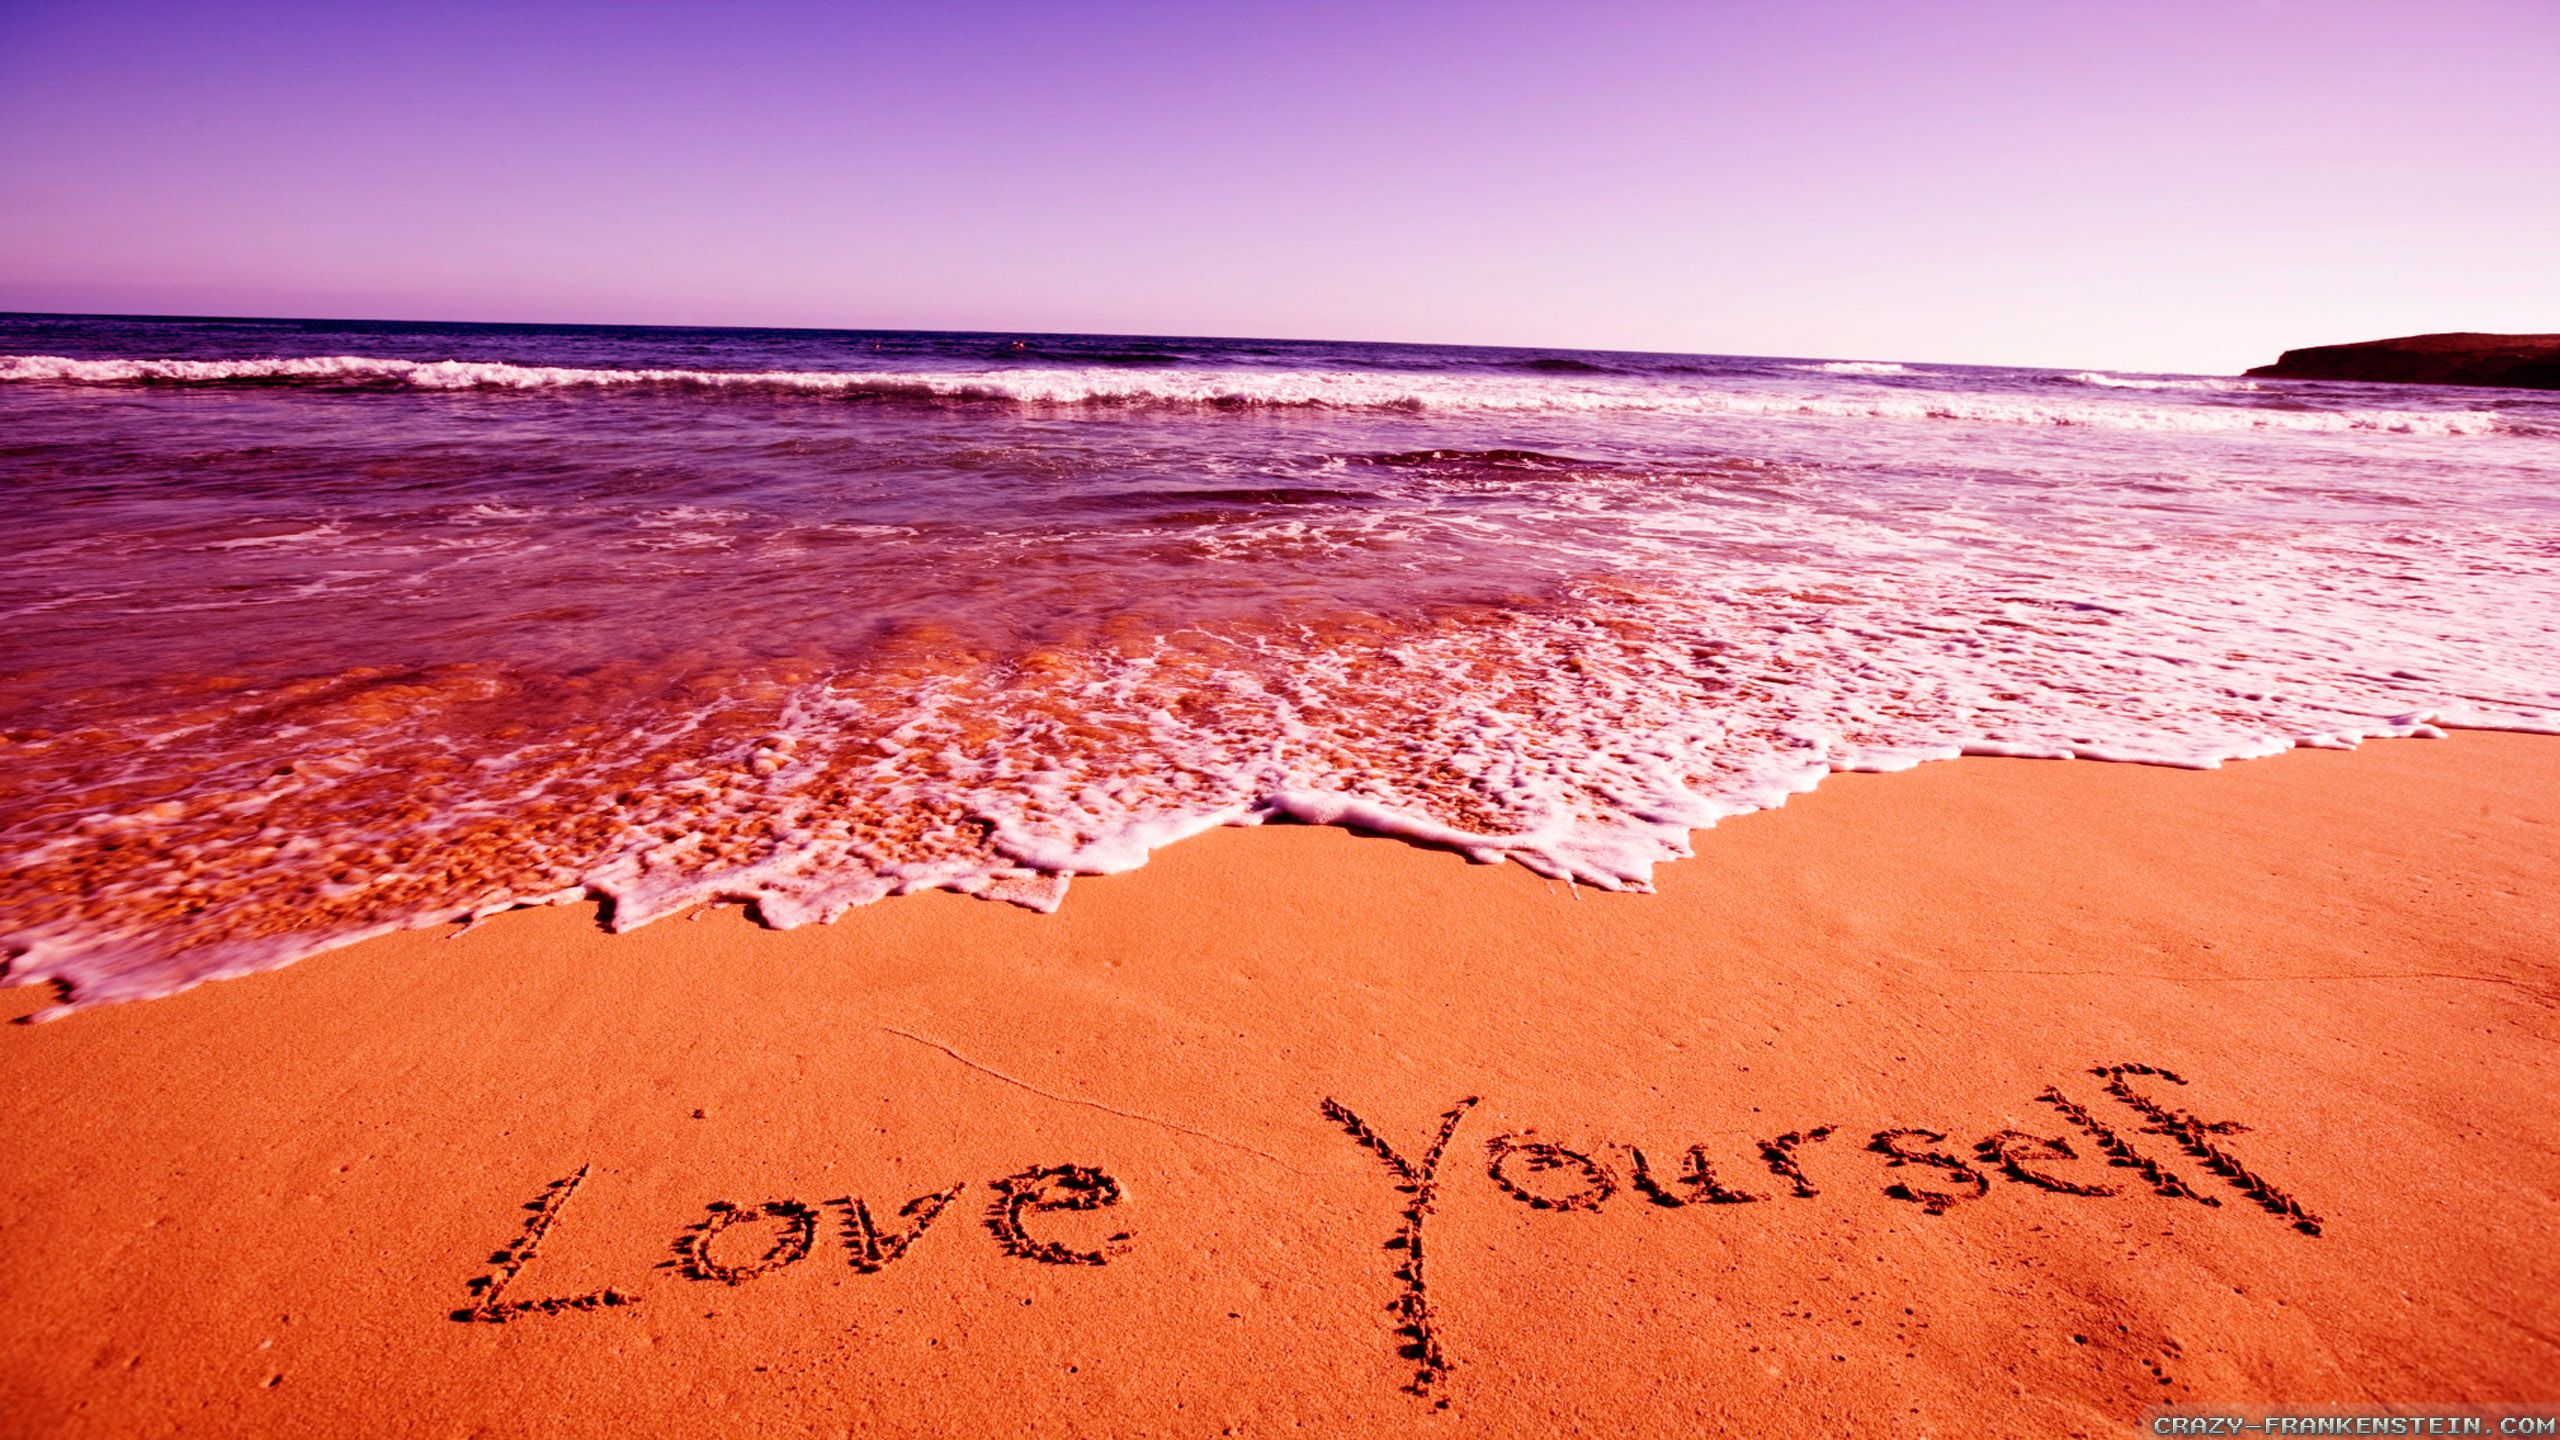 Love Yourself so that You Can Love Others